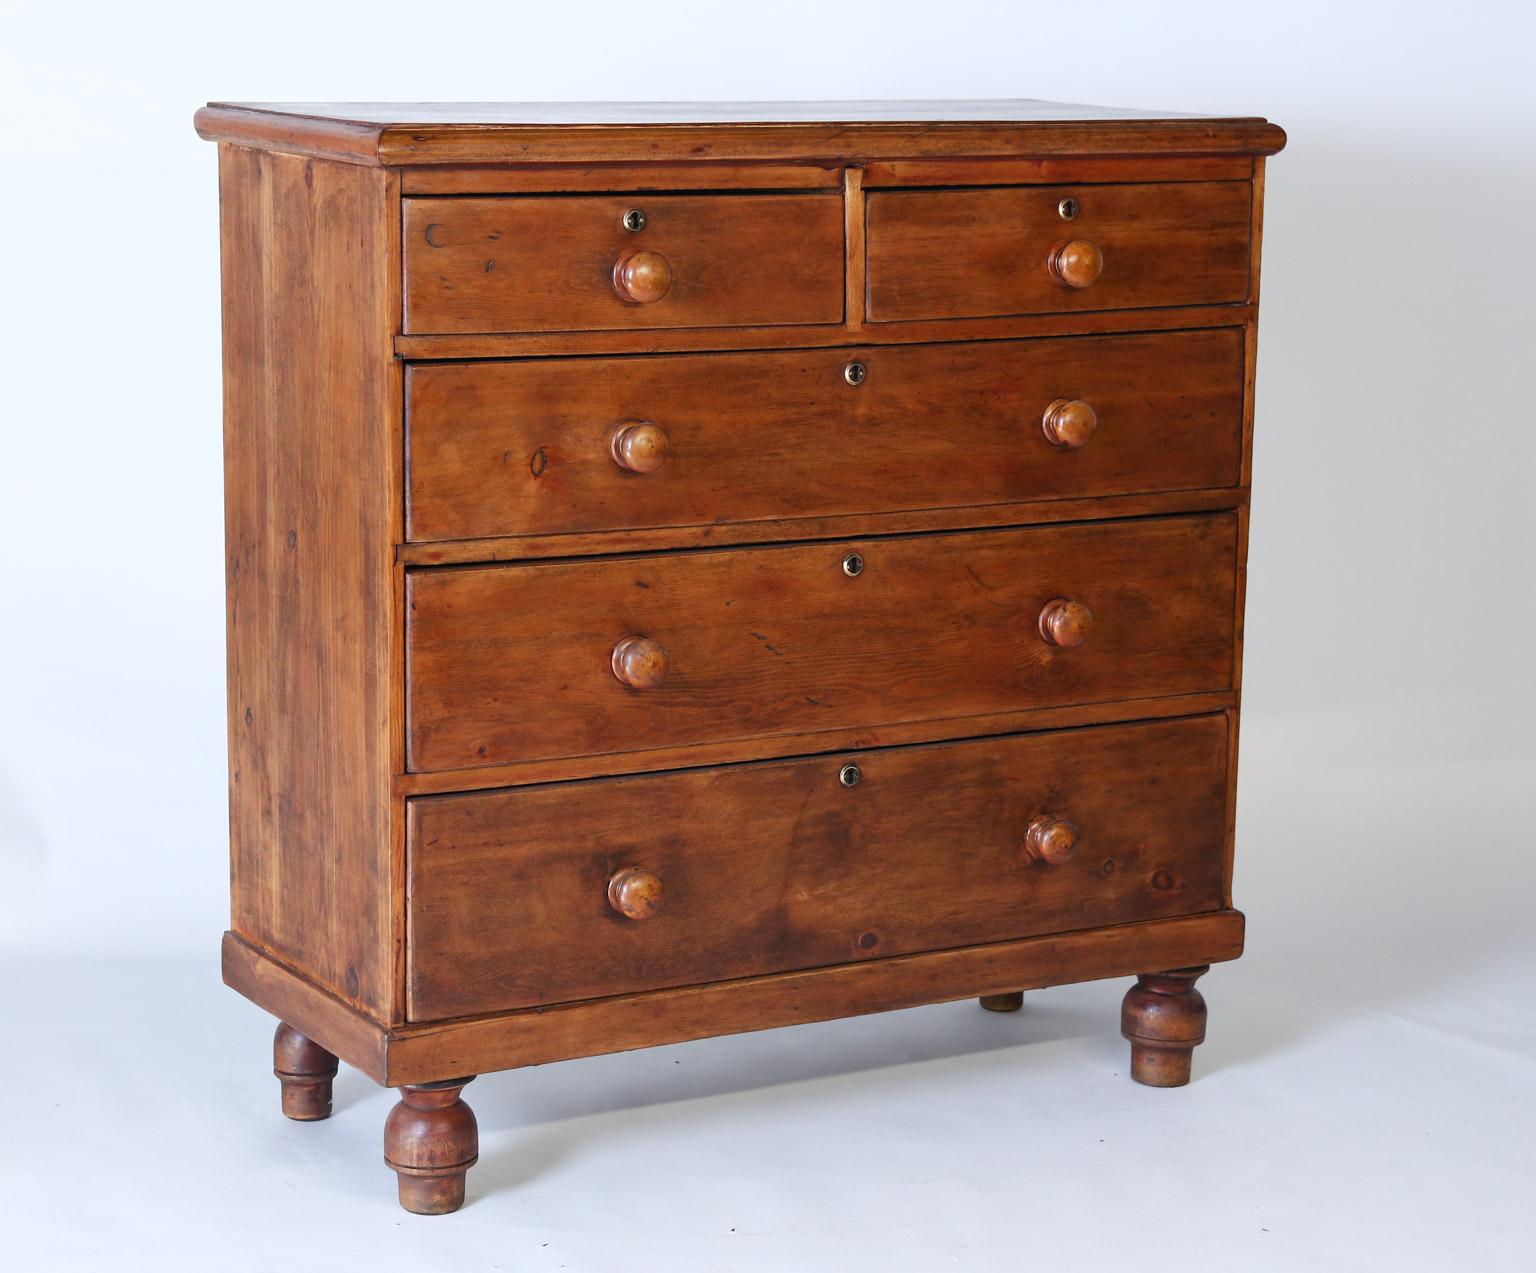 This beautiful English chest of drawers will suit many of your storage needs. The chest is constructed with the classic two over three drawers with simple round knobs and brass key holes. All of the drawers have an iron locking mechanism although no